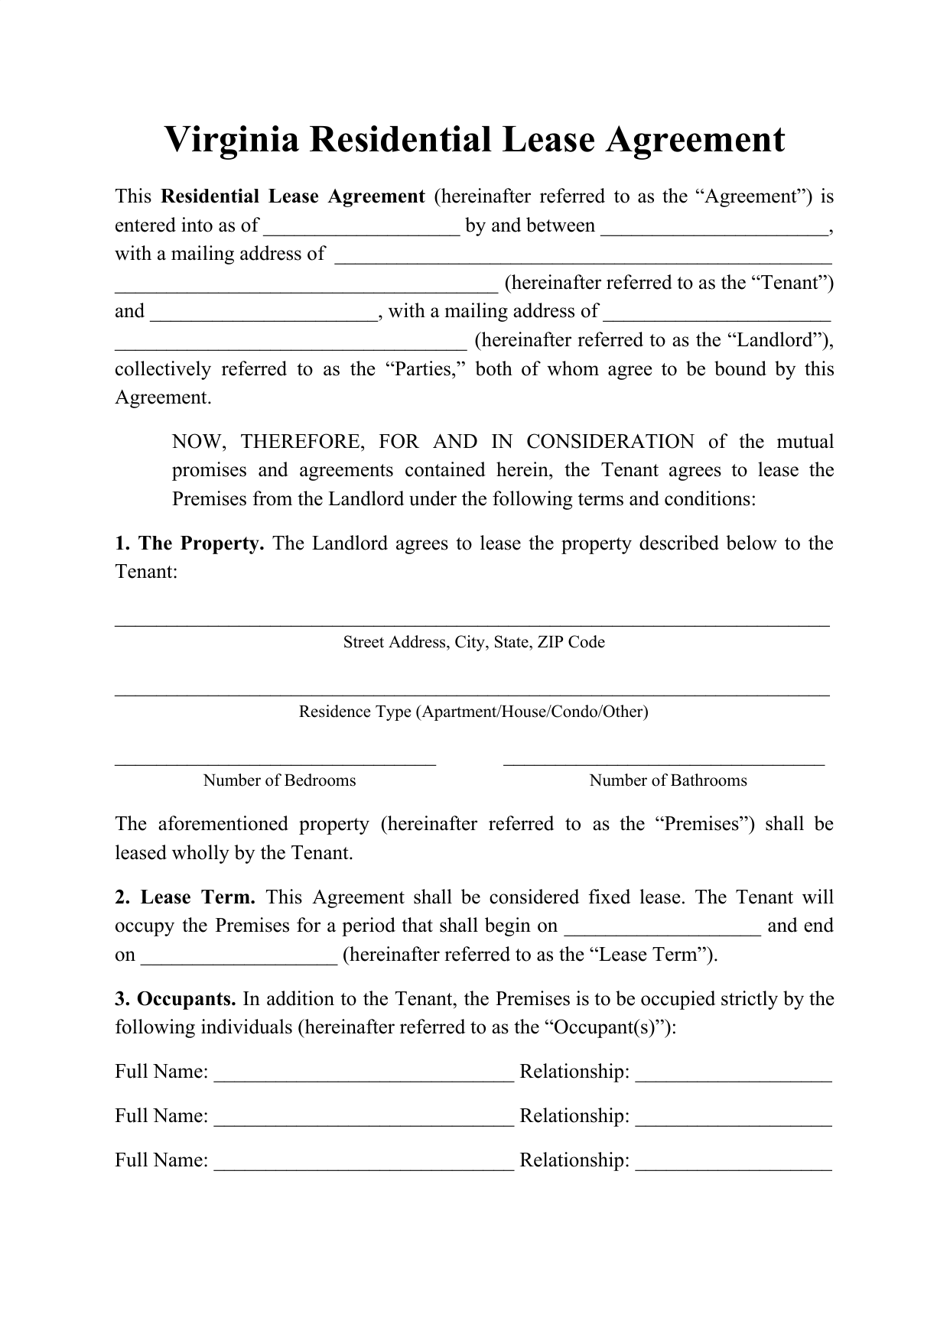 virginia-residential-lease-agreement-template-fill-out-sign-online